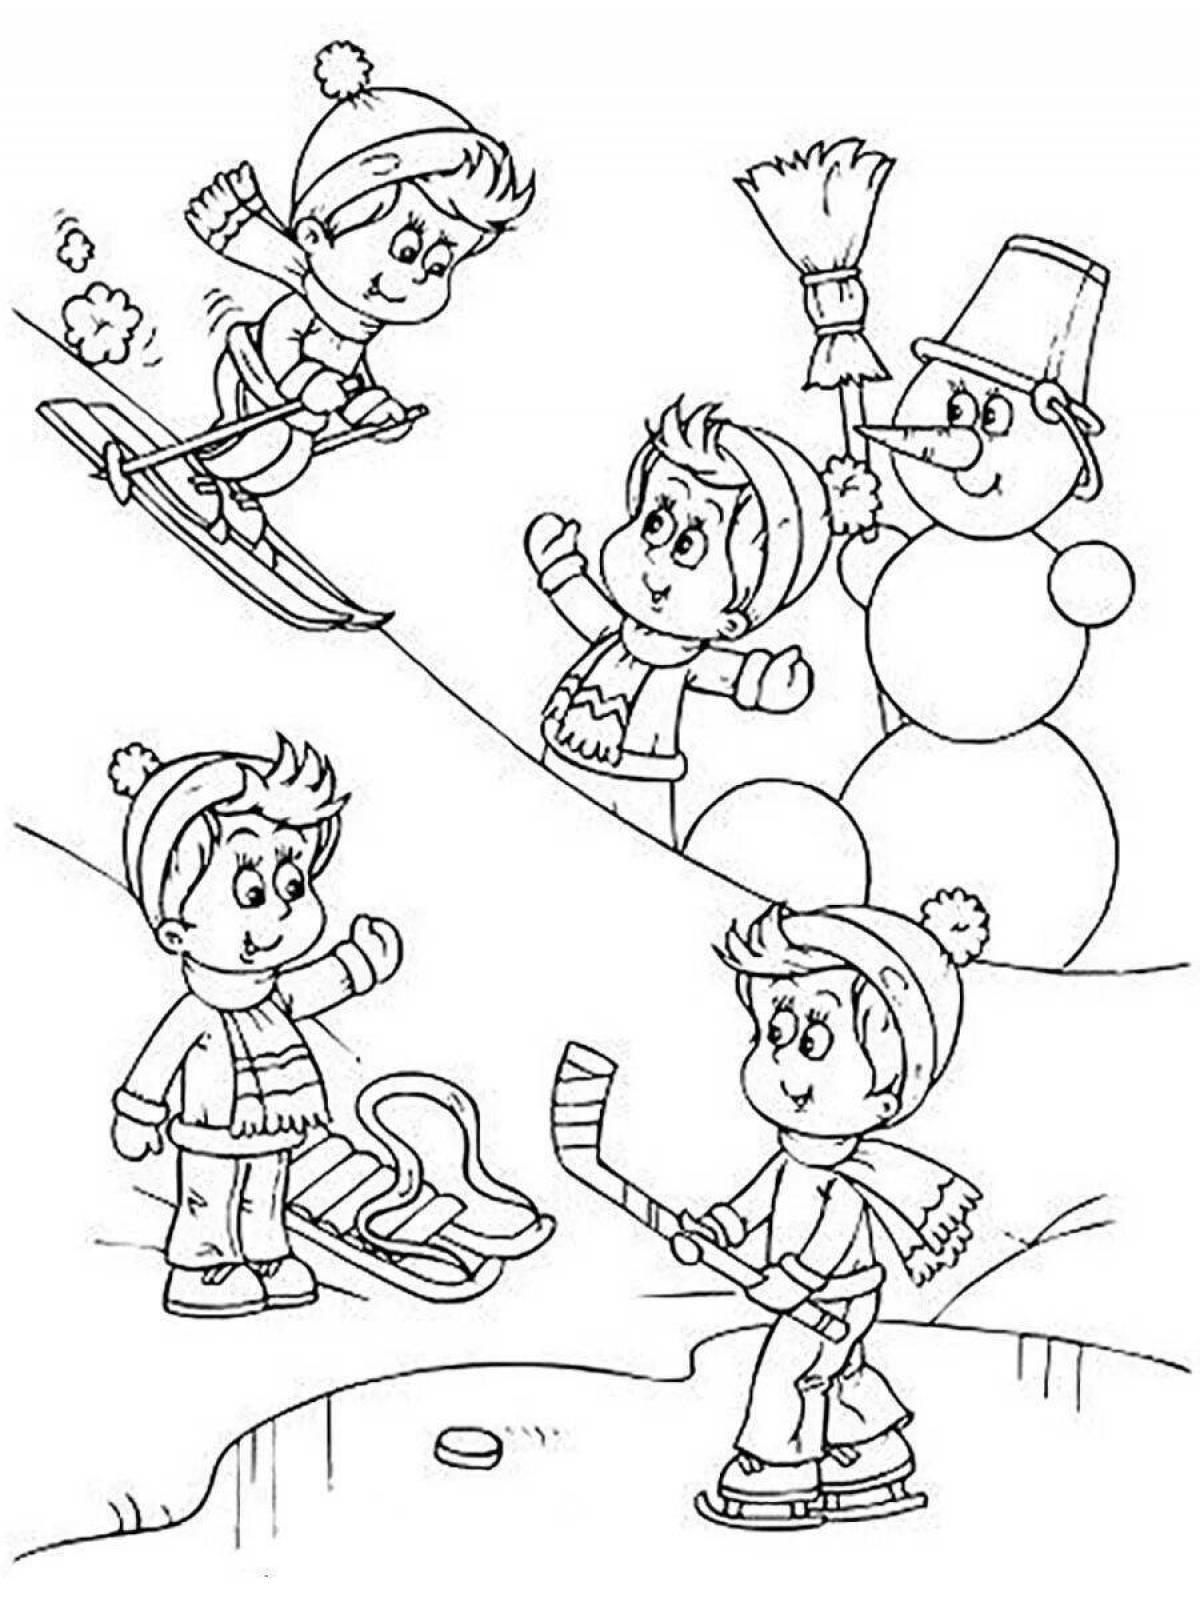 Great winter coloring book